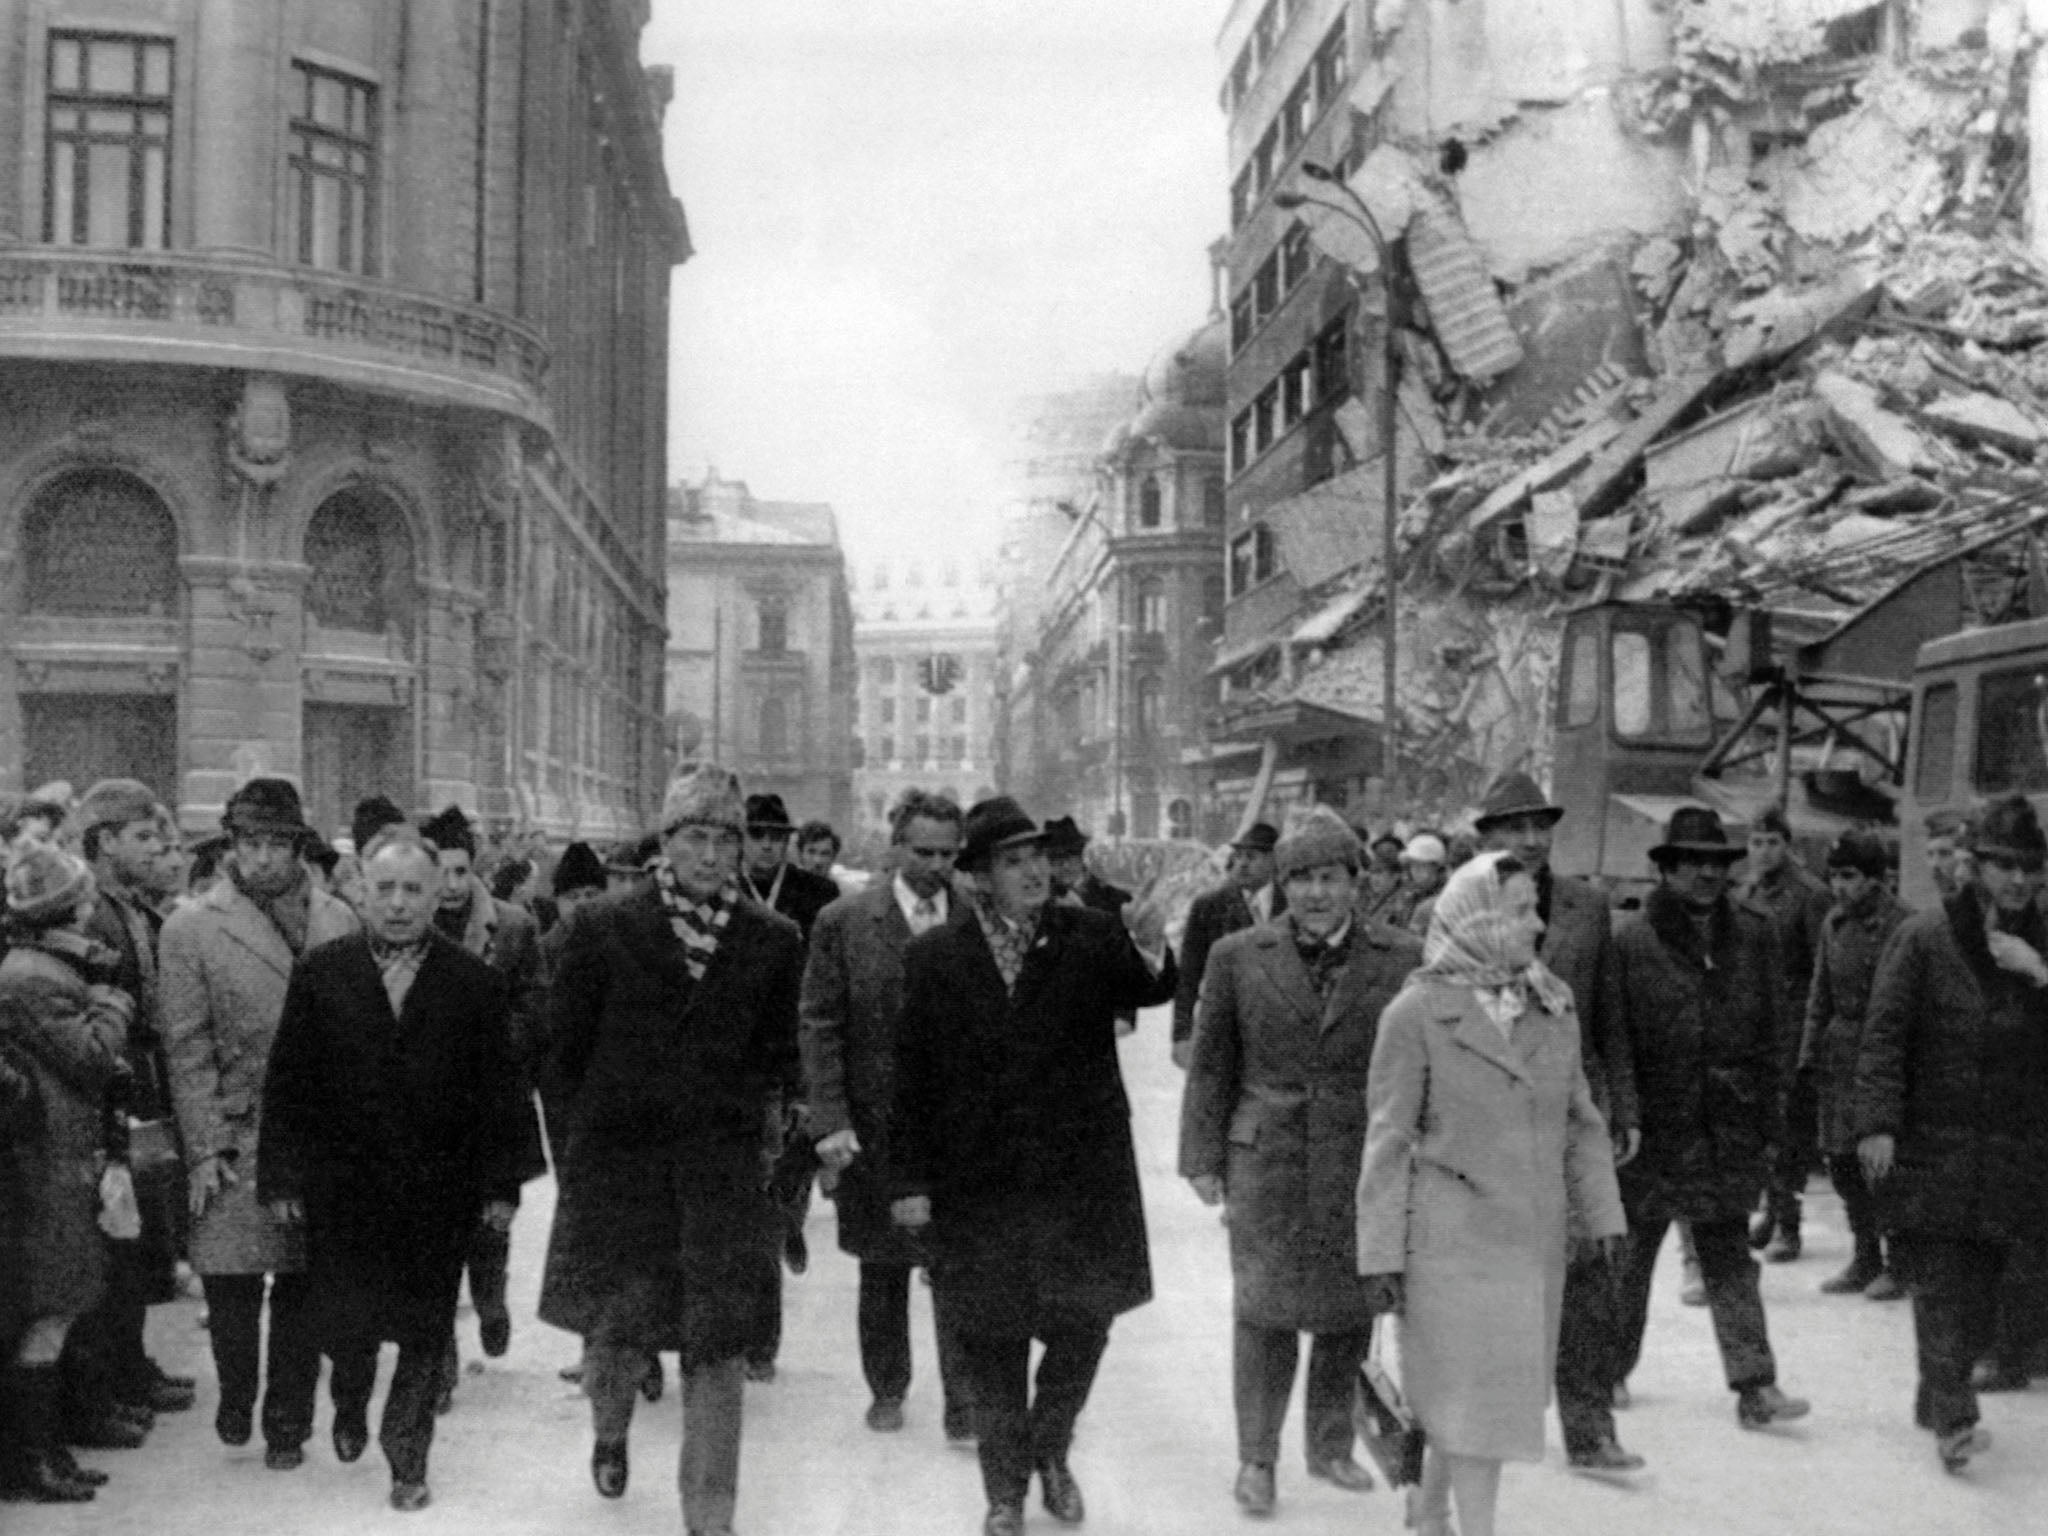 Romanian president Nicolae Ceausescu (centre) observes the damage in Bucharest after the Vrancea earthquake in 1977